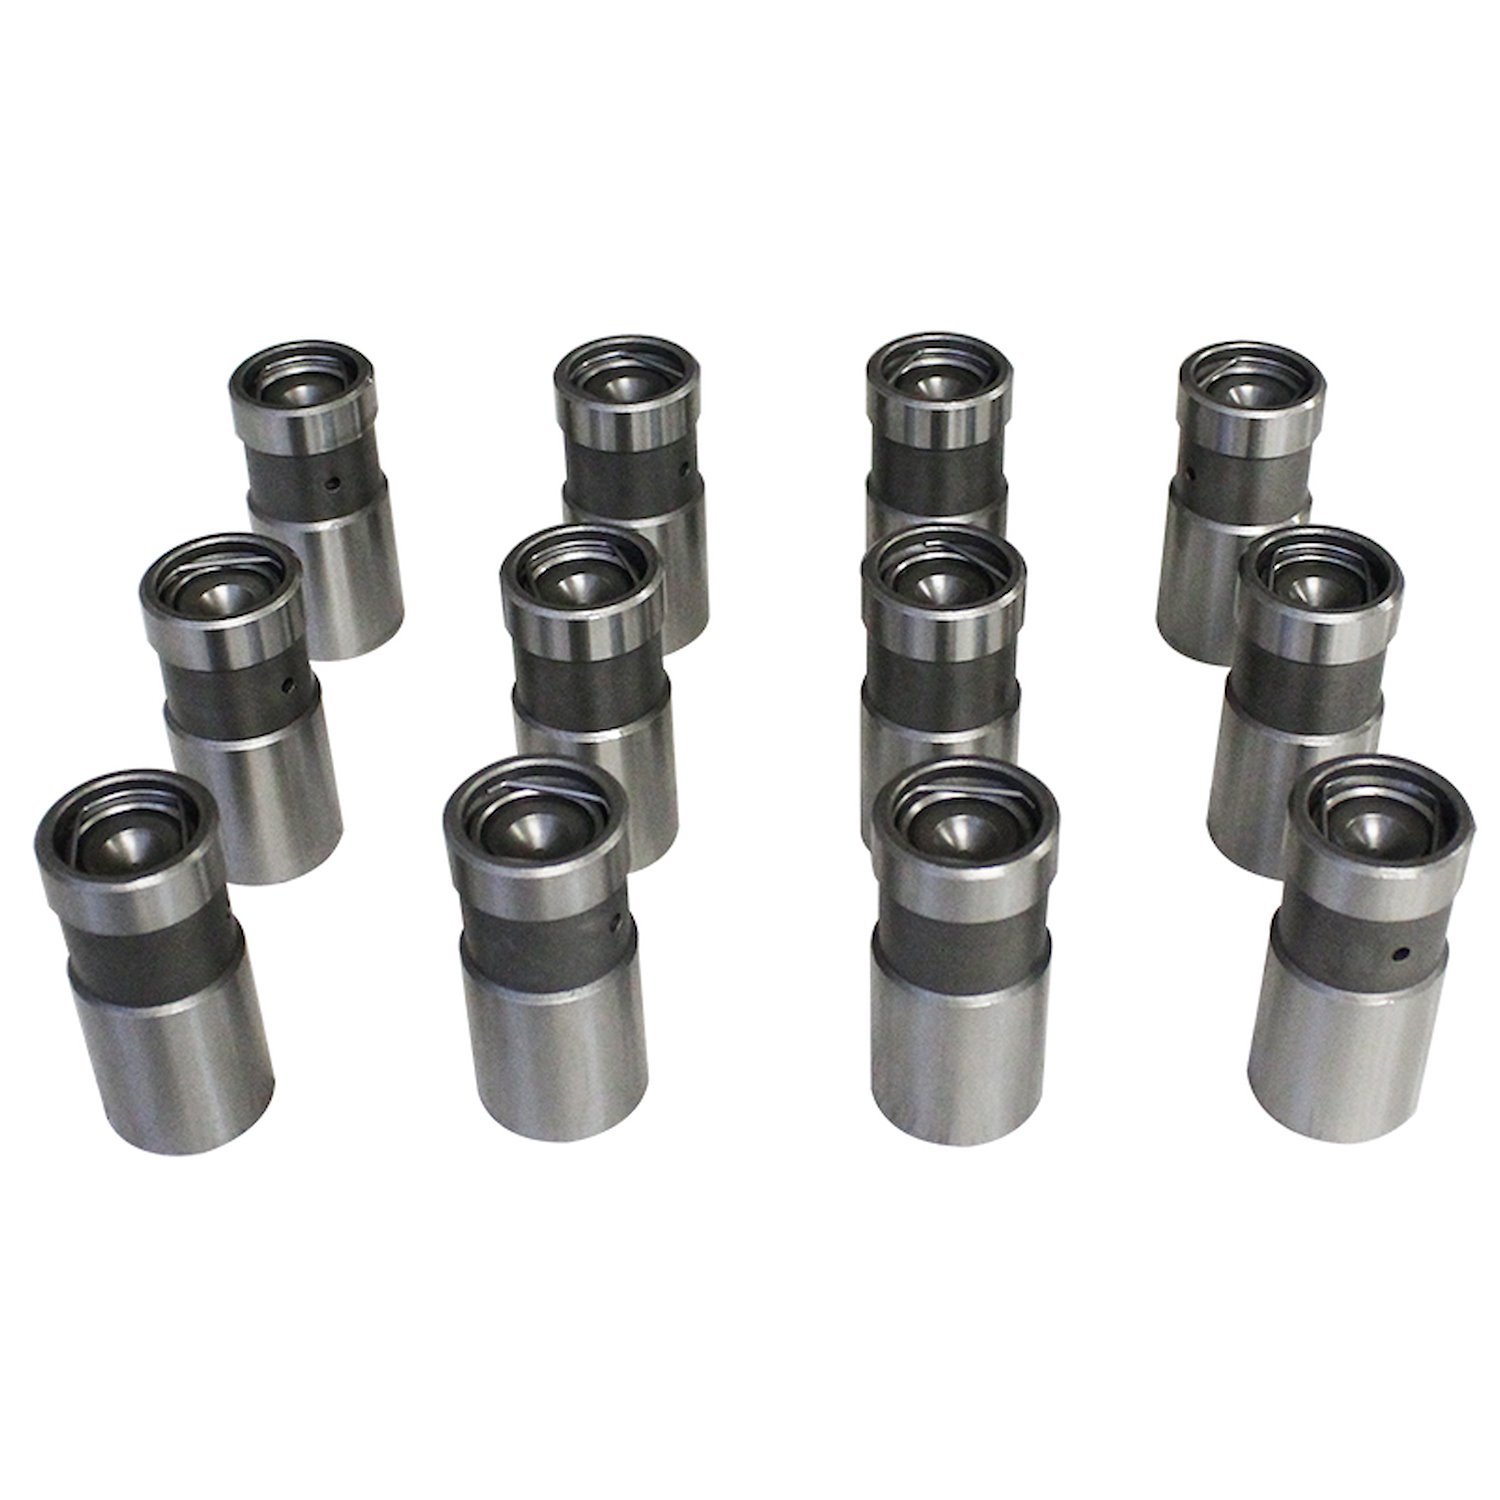 Performance Hydraulic Flat Tappet Lifter Set Straight 6 Ford 144-250